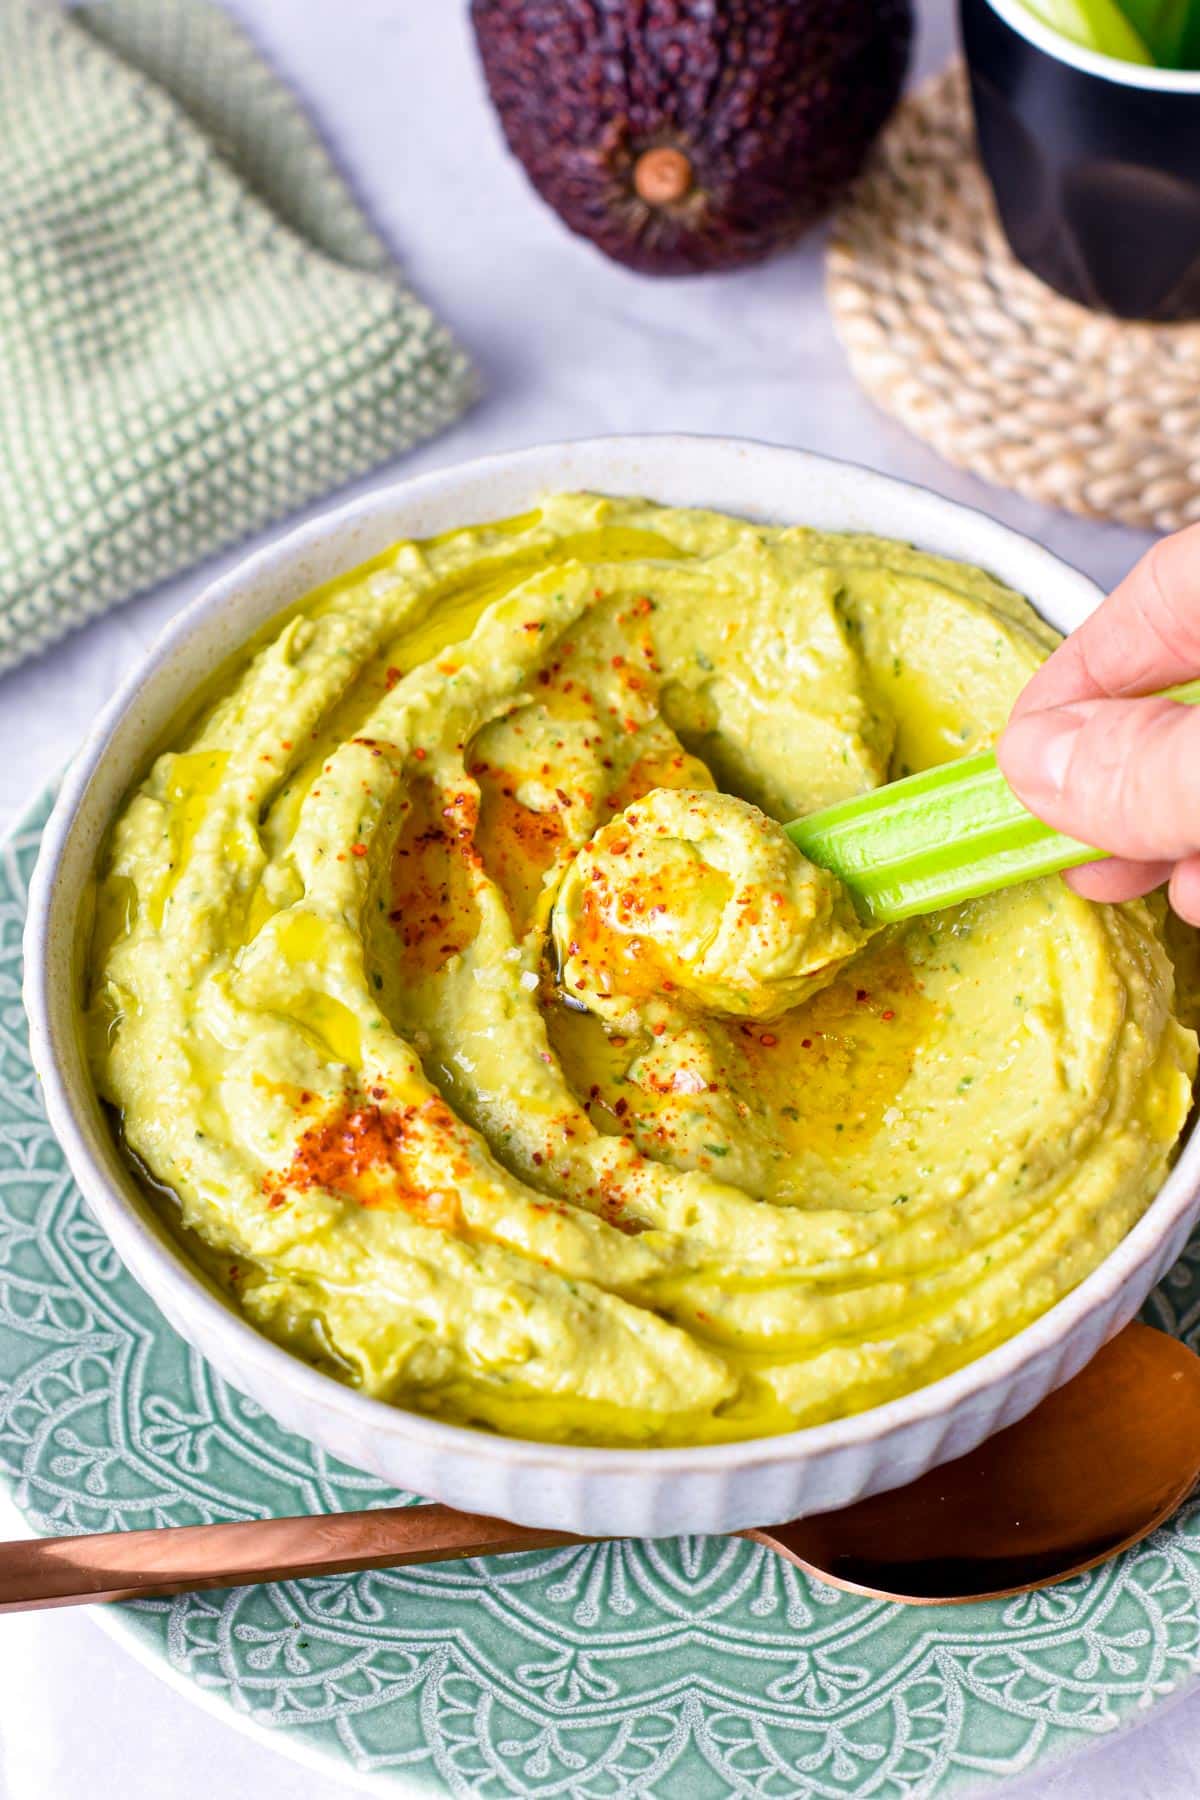 This Avocado Hummus is a creamy green hummus packed with avocado for a boost of healthy fats and ultra creamy texture. Plus, this easy hummus recipe is also vegan, gluten-free and dairy-free so everyone can dip in.This Avocado Hummus is a creamy green hummus packed with avocado for a boost of healthy fats and ultra creamy texture. Plus, this easy hummus recipe is also vegan, gluten-free and dairy-free so everyone can dip in.